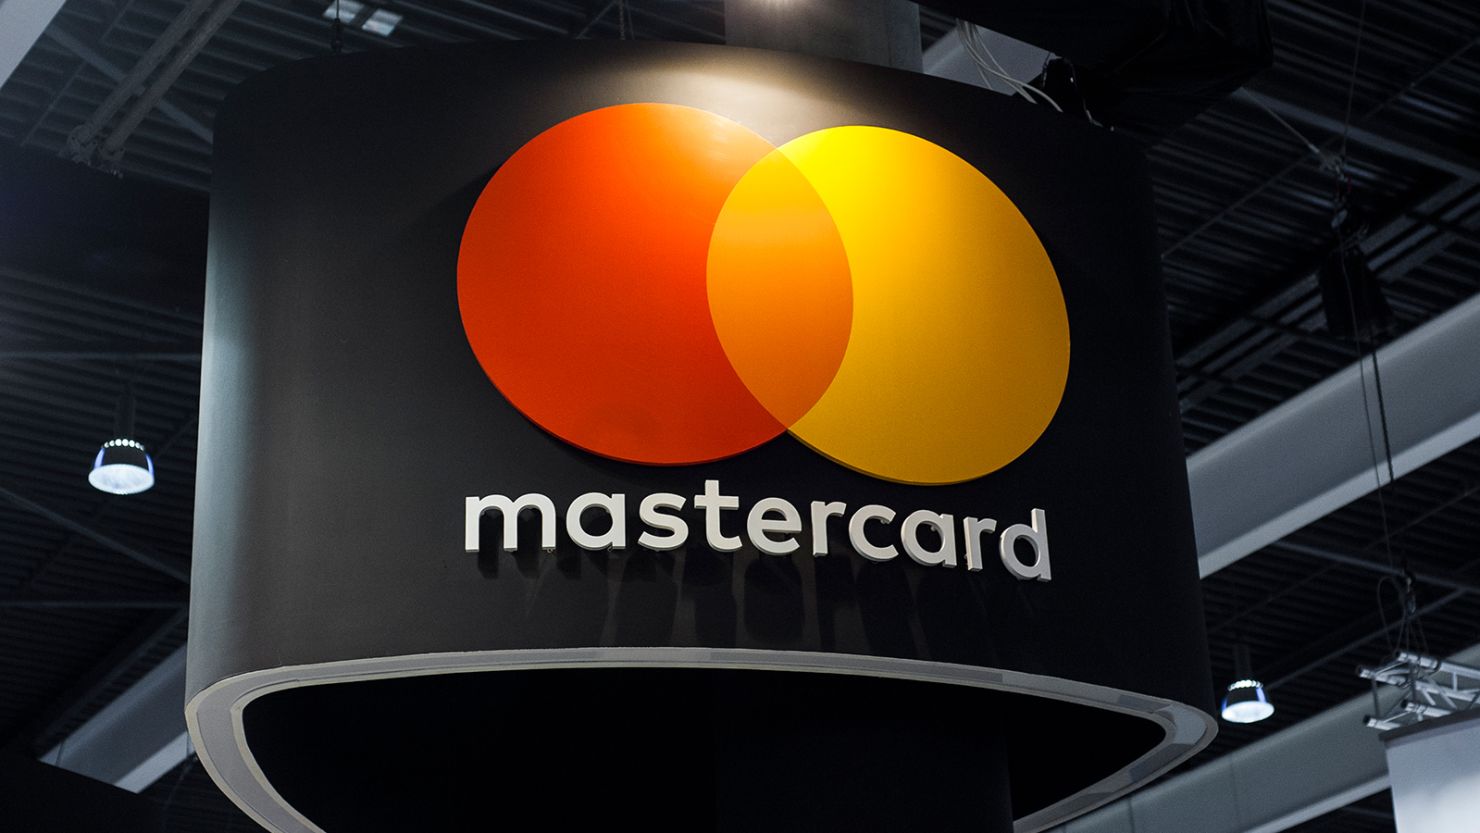 A view of the MasterCard company logo on their stand during the Mobile World Congress on March 1, 2017 in Barcelona, Spain.